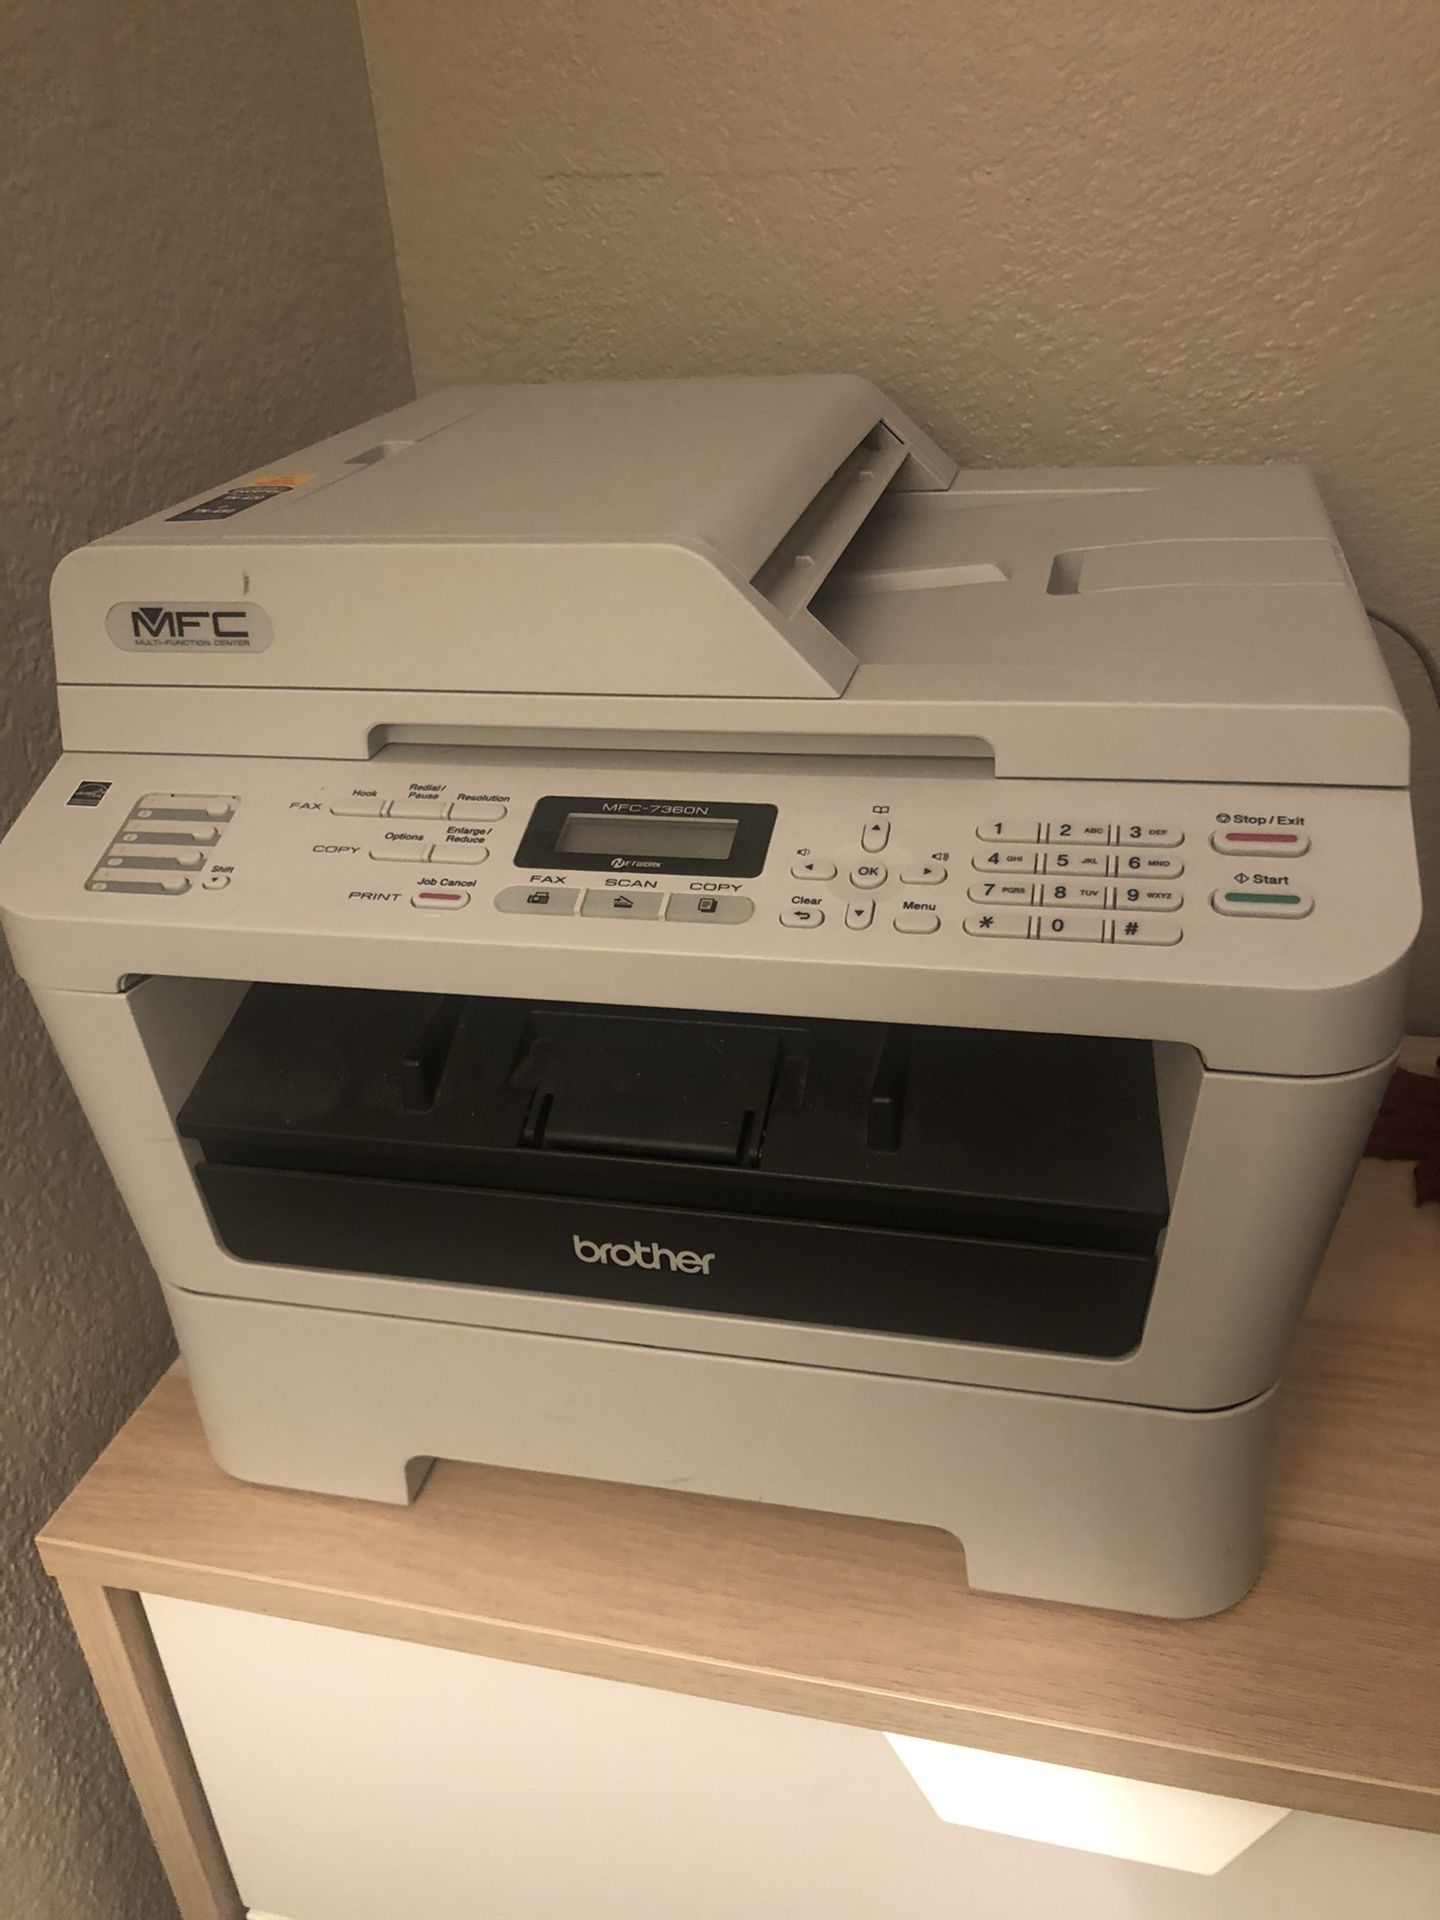 Printer with ink